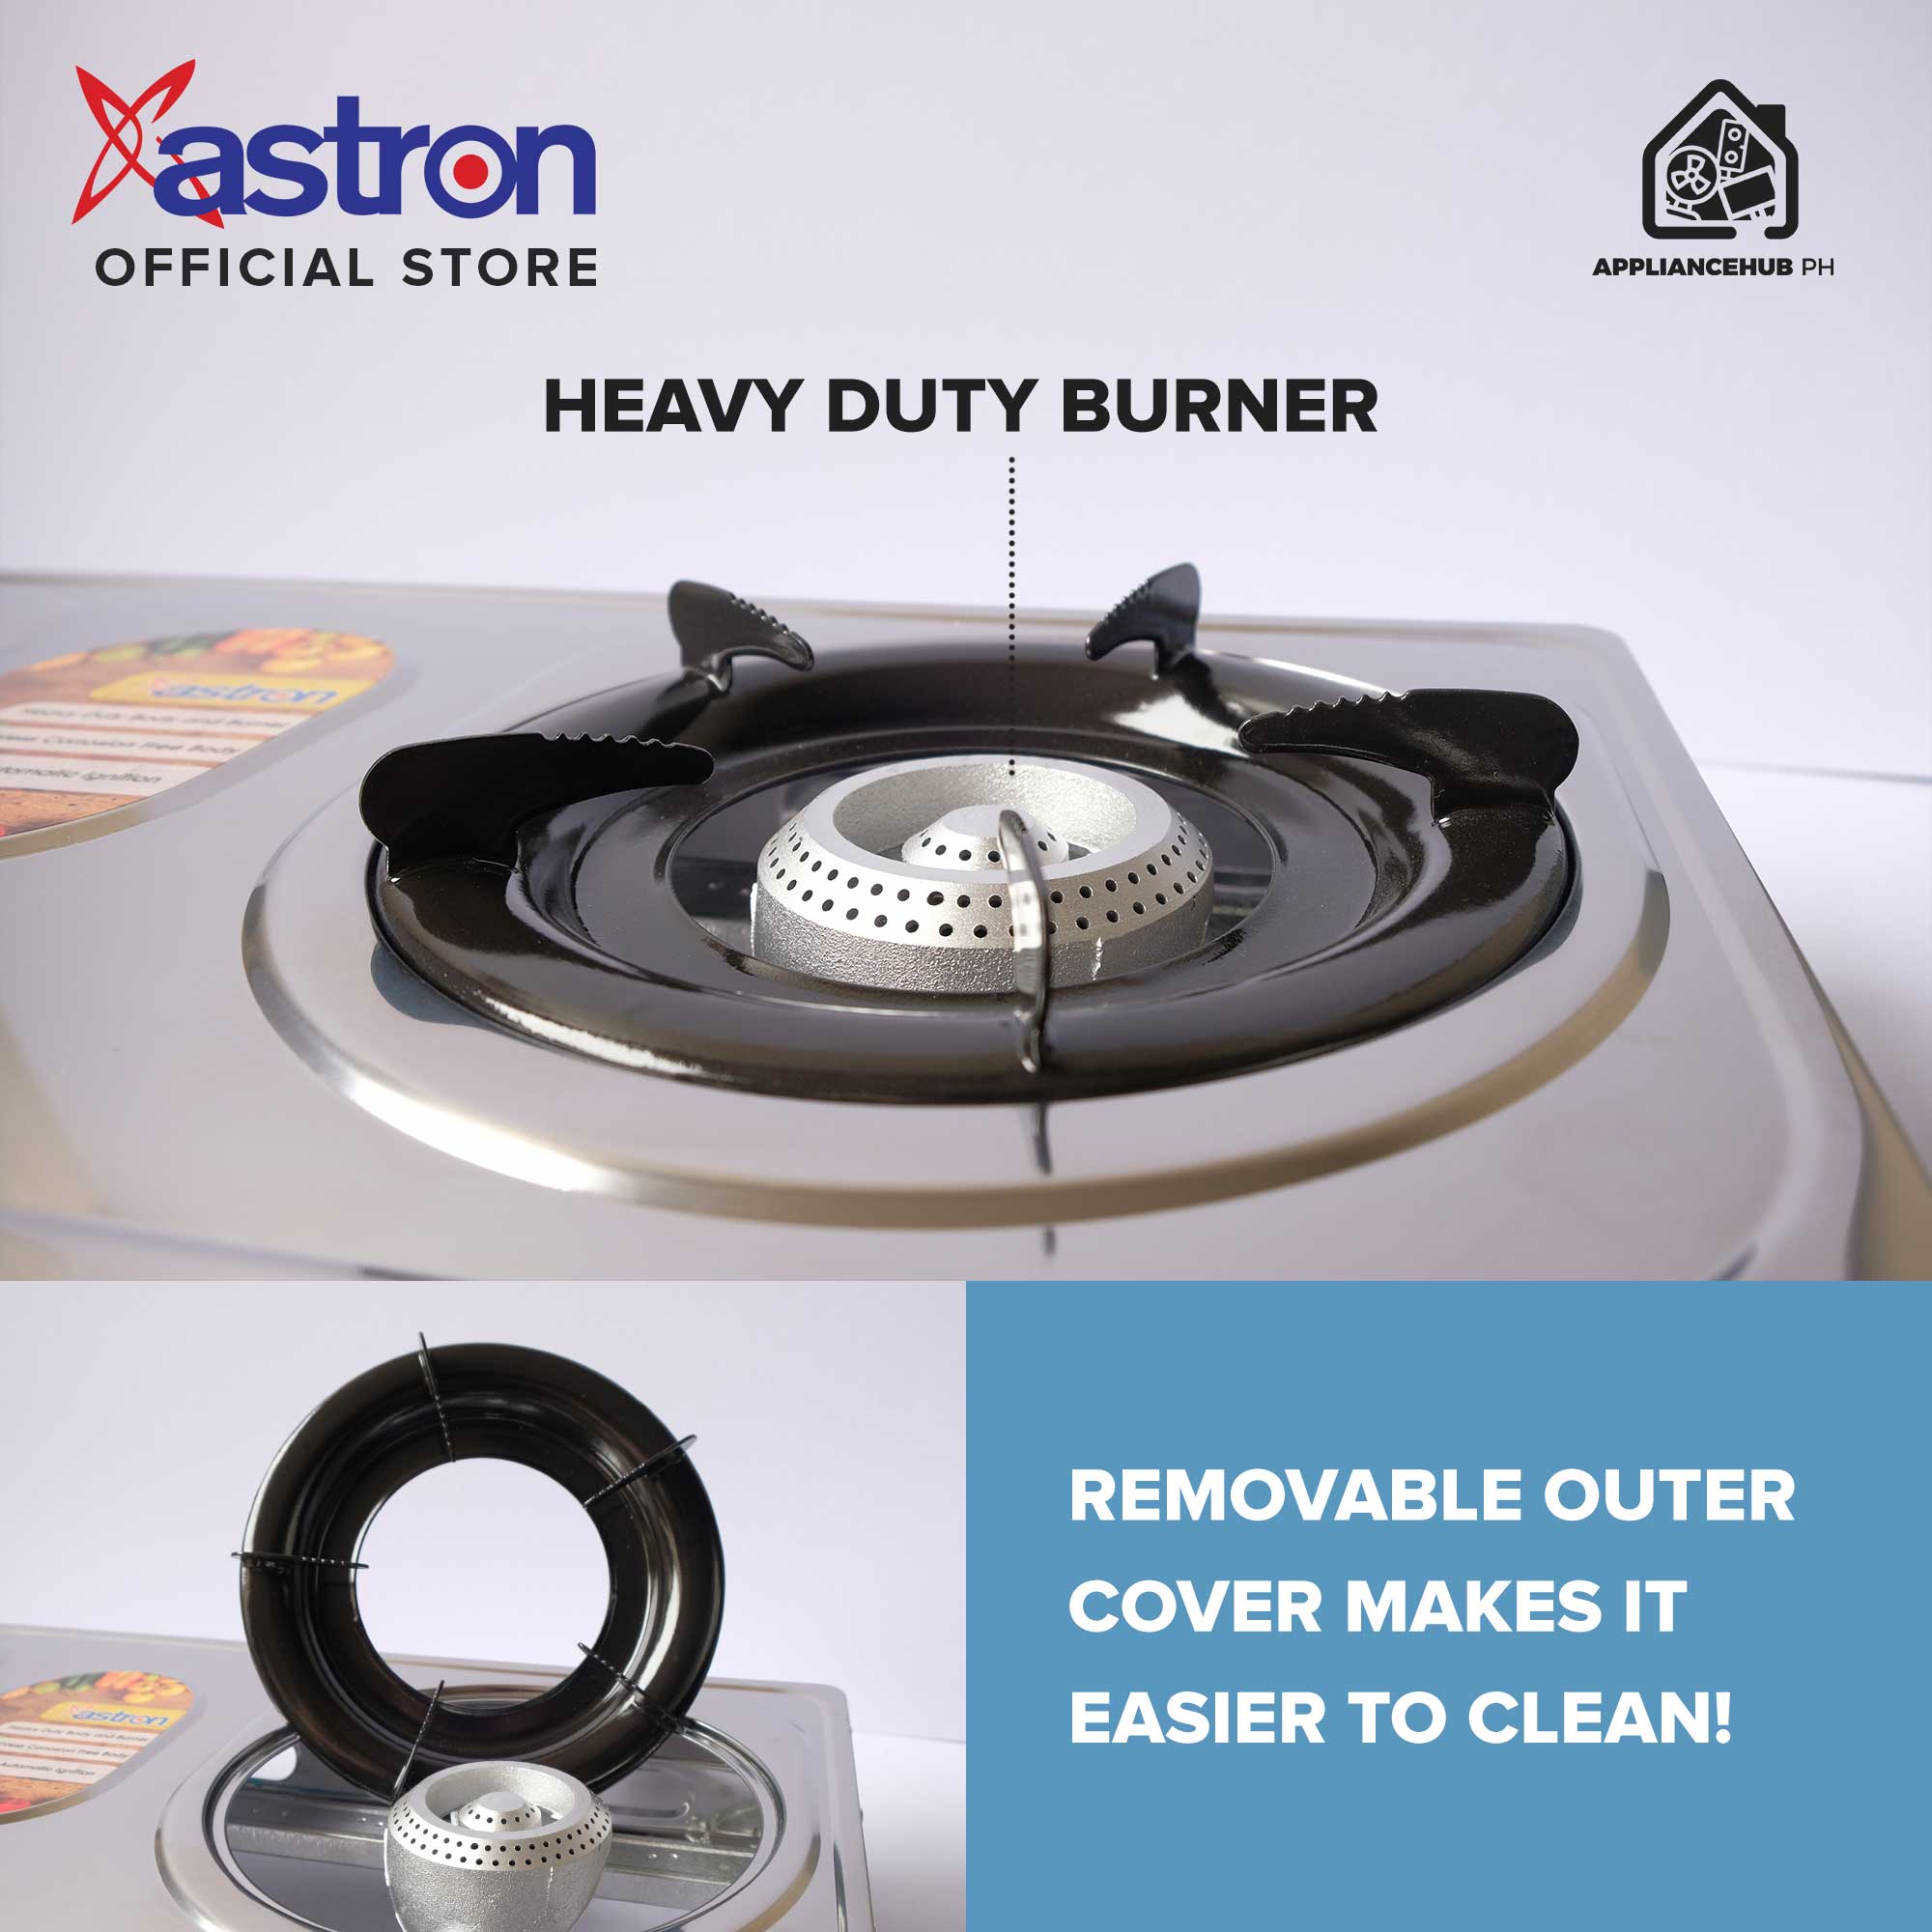 ASTRON GS-288 Heavy Duty Double Burner Gas Stove Stainless Body Astron